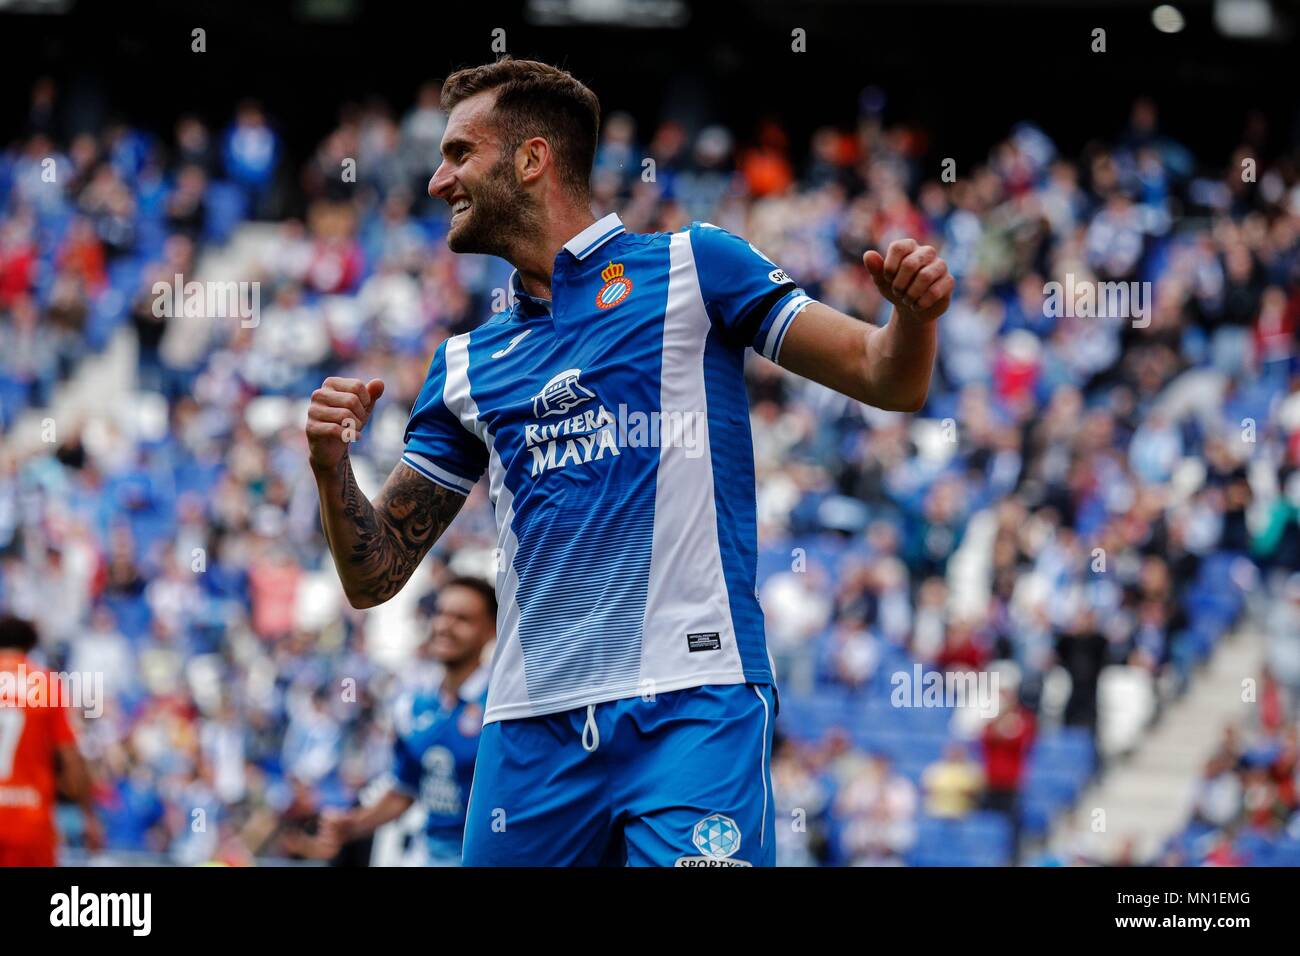 Barcelona, Spain. 13th May, 2018. RCD Espanyol's Leo Baptistao celebrates  his goal during a Spanish league match between RCD Espanyol and Malaga in  Barcelona, Spain, on May 13, 2018. RCD Espanyol won